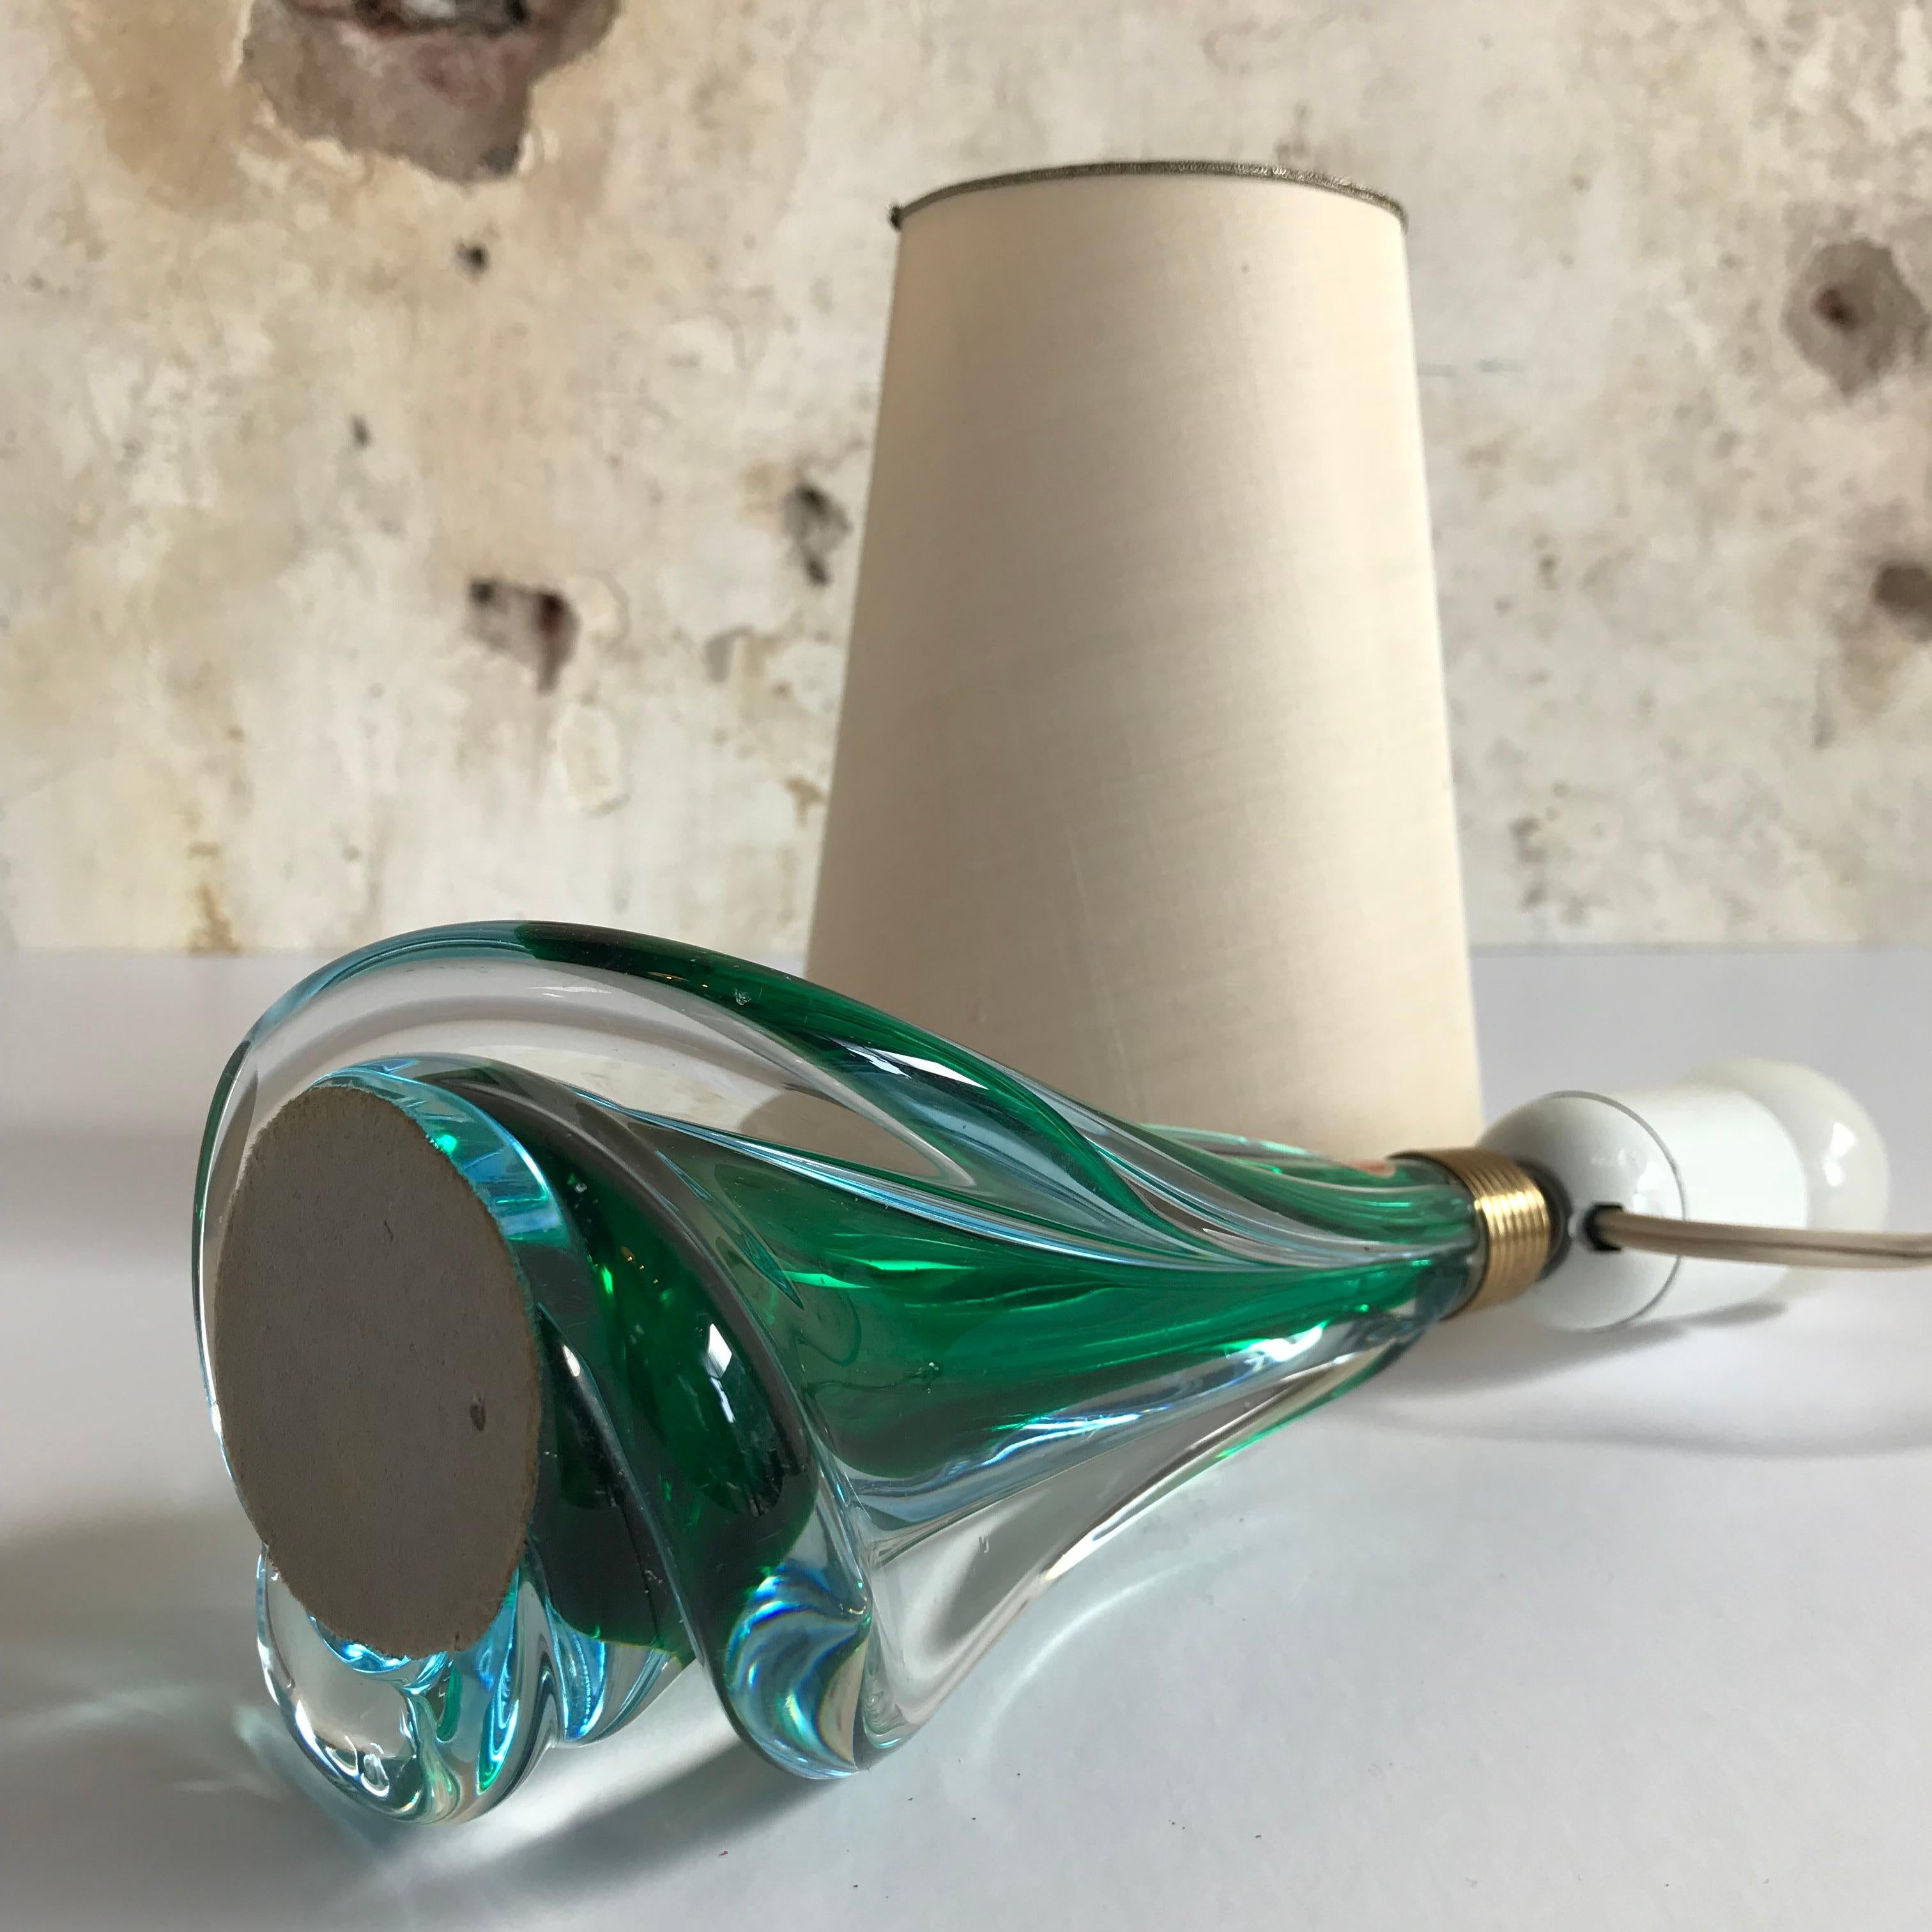 1950s Italian Murano Art Glass Lamp by Pietro Toso, Midcentury, Vintage For Sale 2